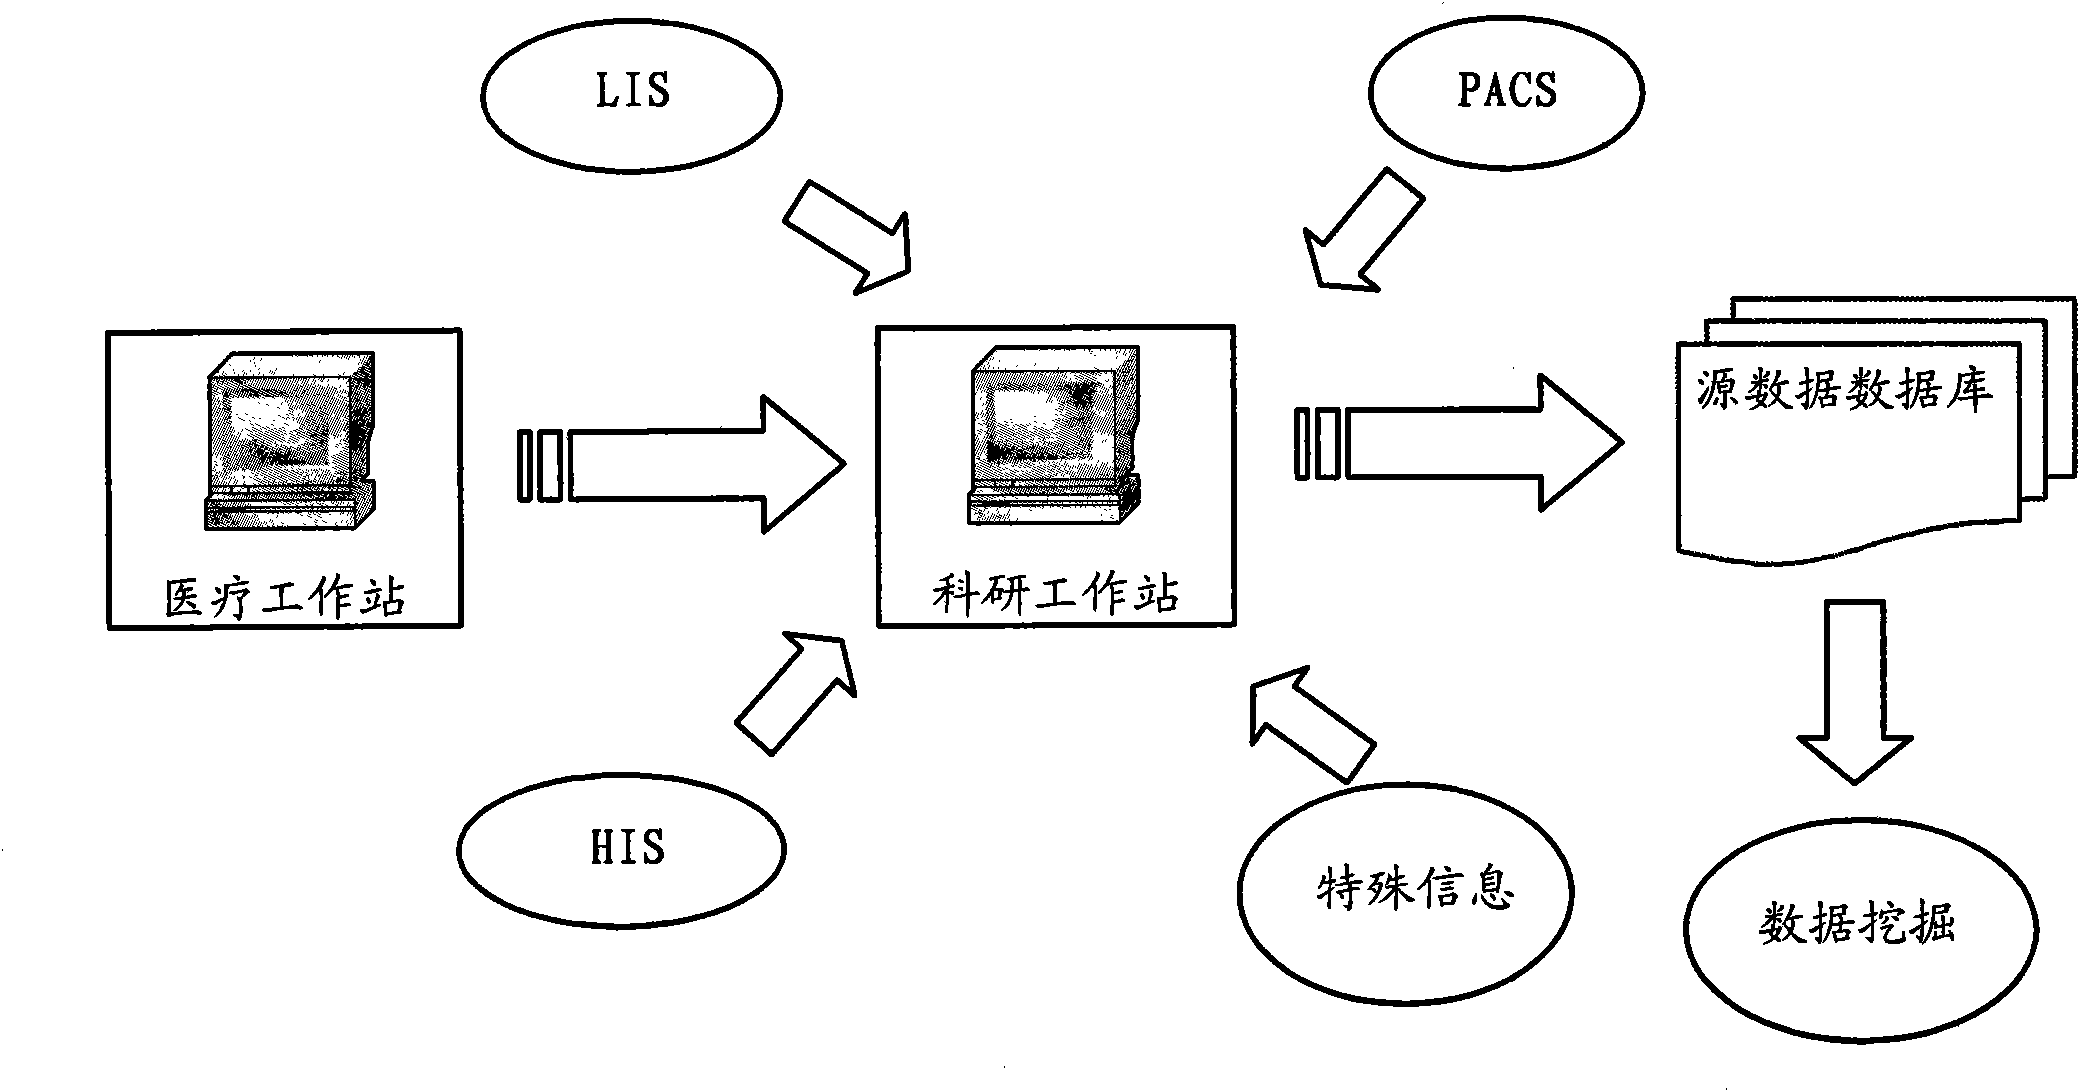 Data acquisition and management system and method